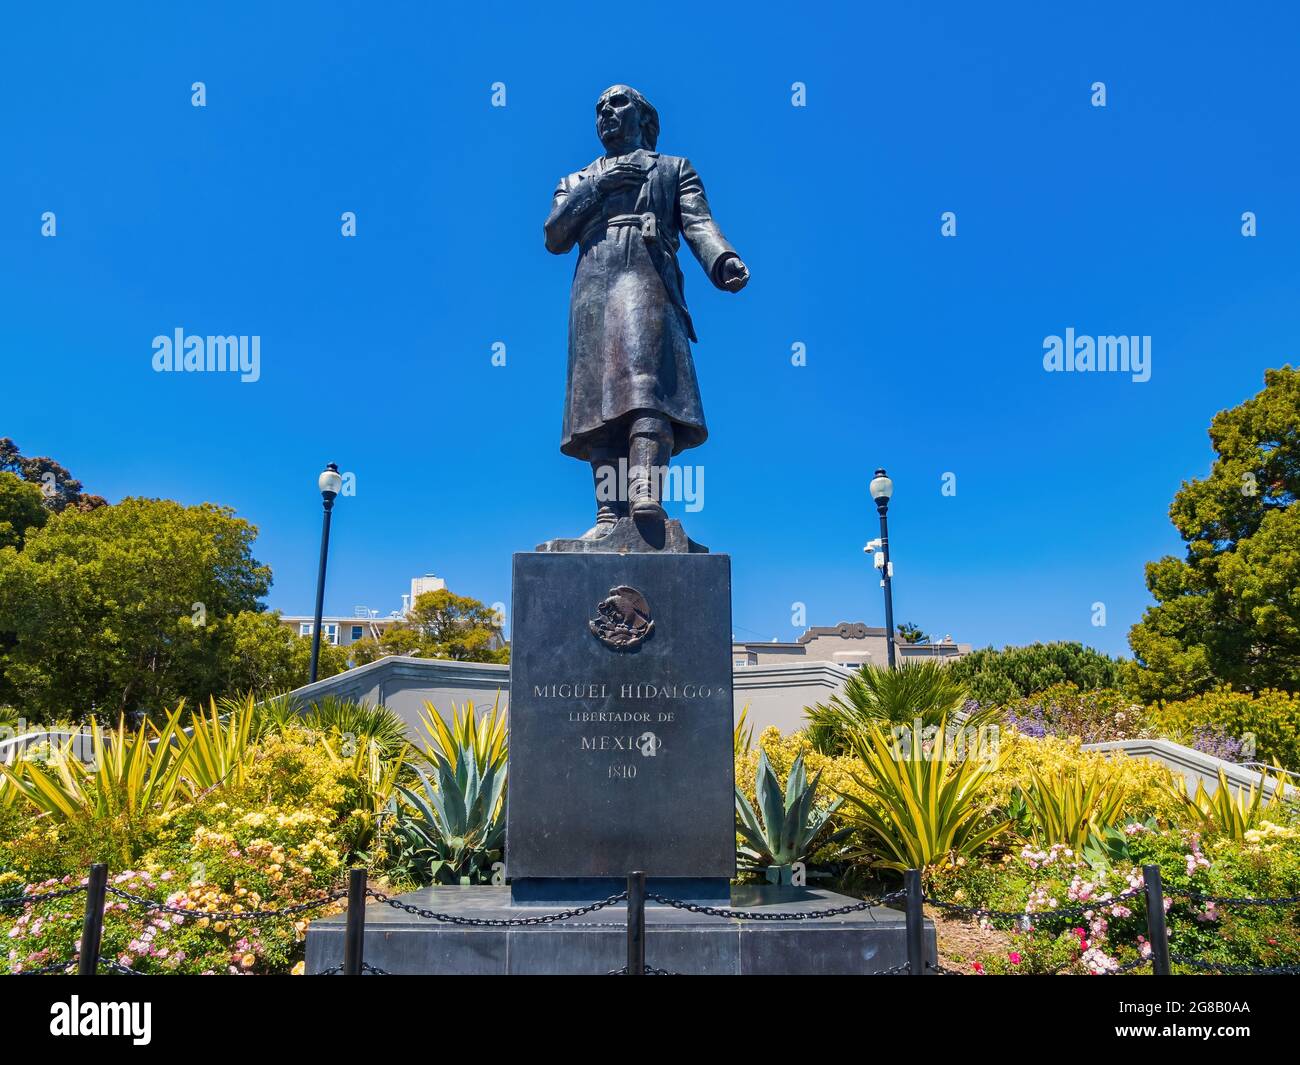 Sunny view of the Miguel Hidalgo statue in the Mission Dolores Park at San Francisco Stock Photo